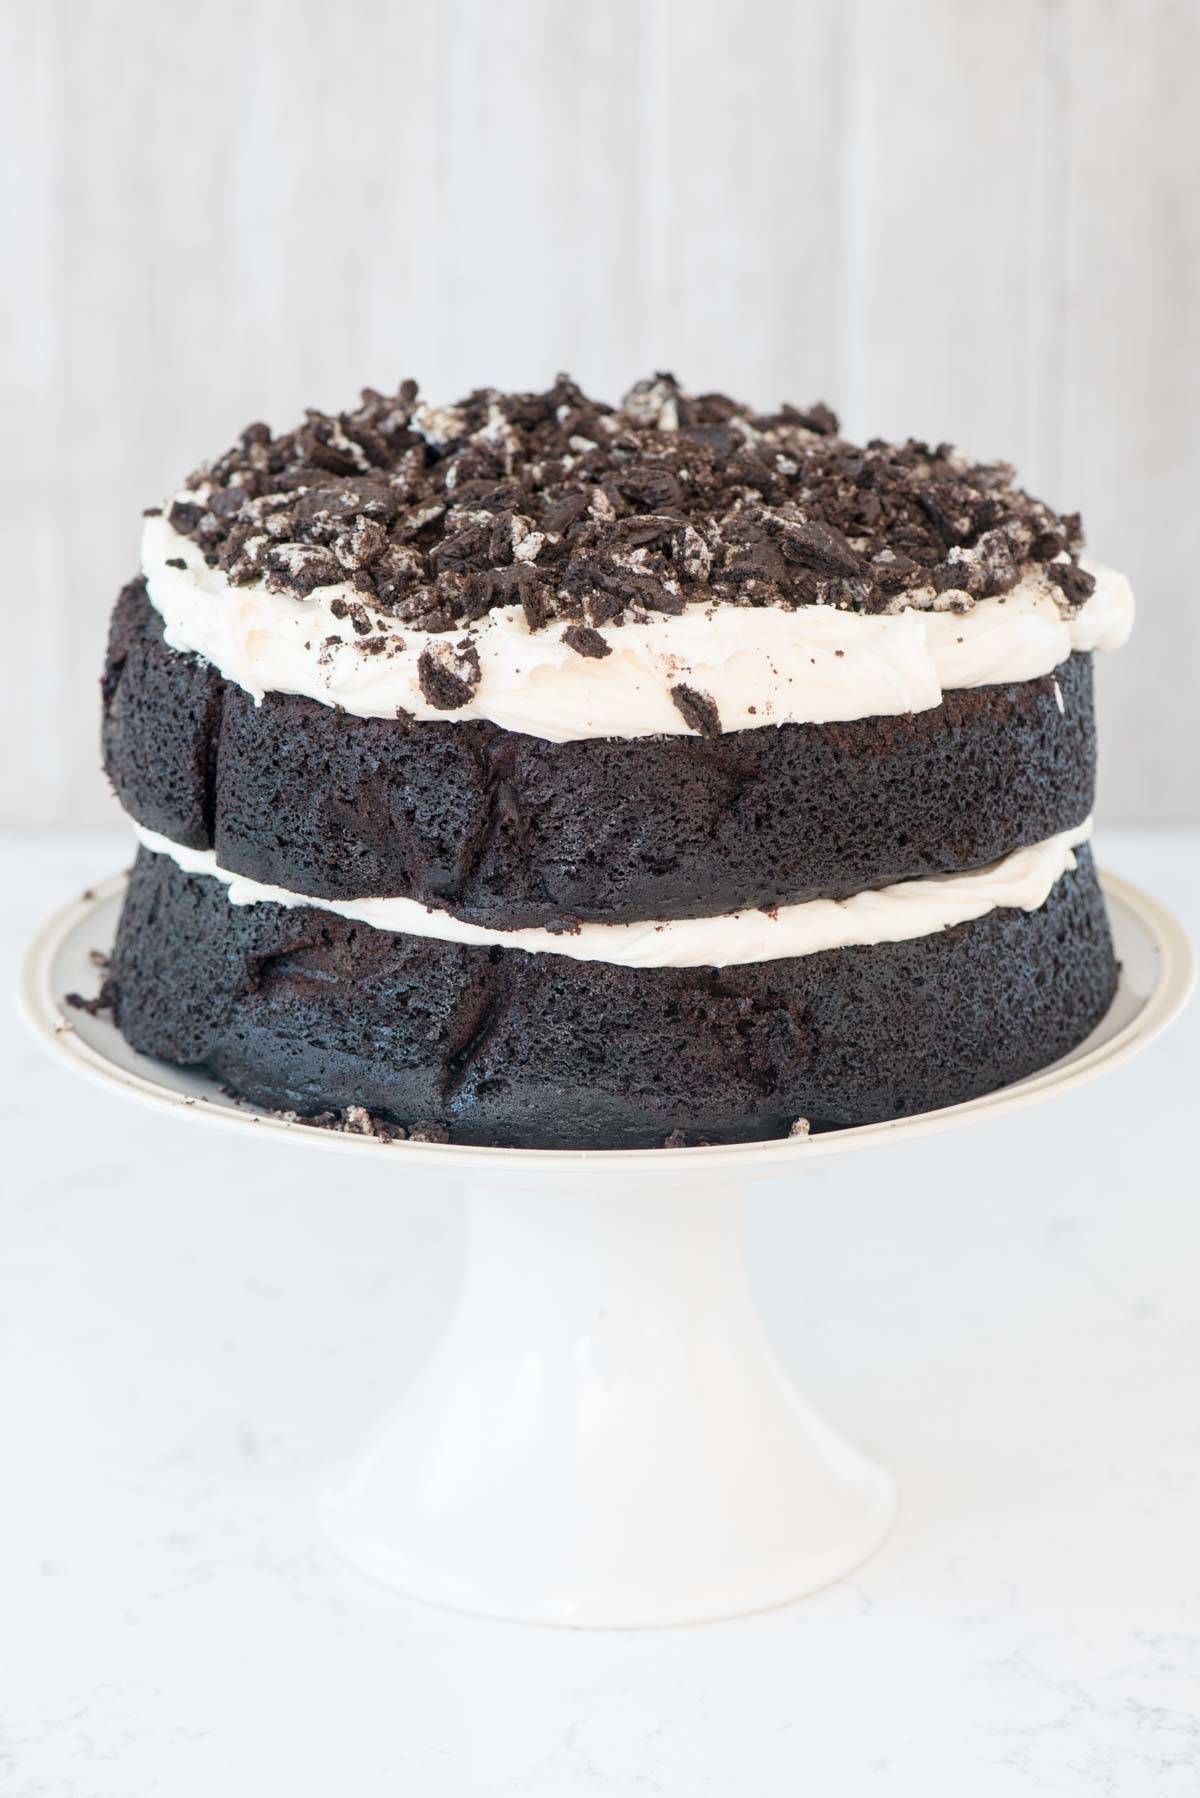 Extreme Cookies 'n Cream Cake - this cake tastes like an Oreo cookie! Dark chocolate cake layers sandwiched with a marshmallow buttercream frosting and lots of crushed Oreo cookies.